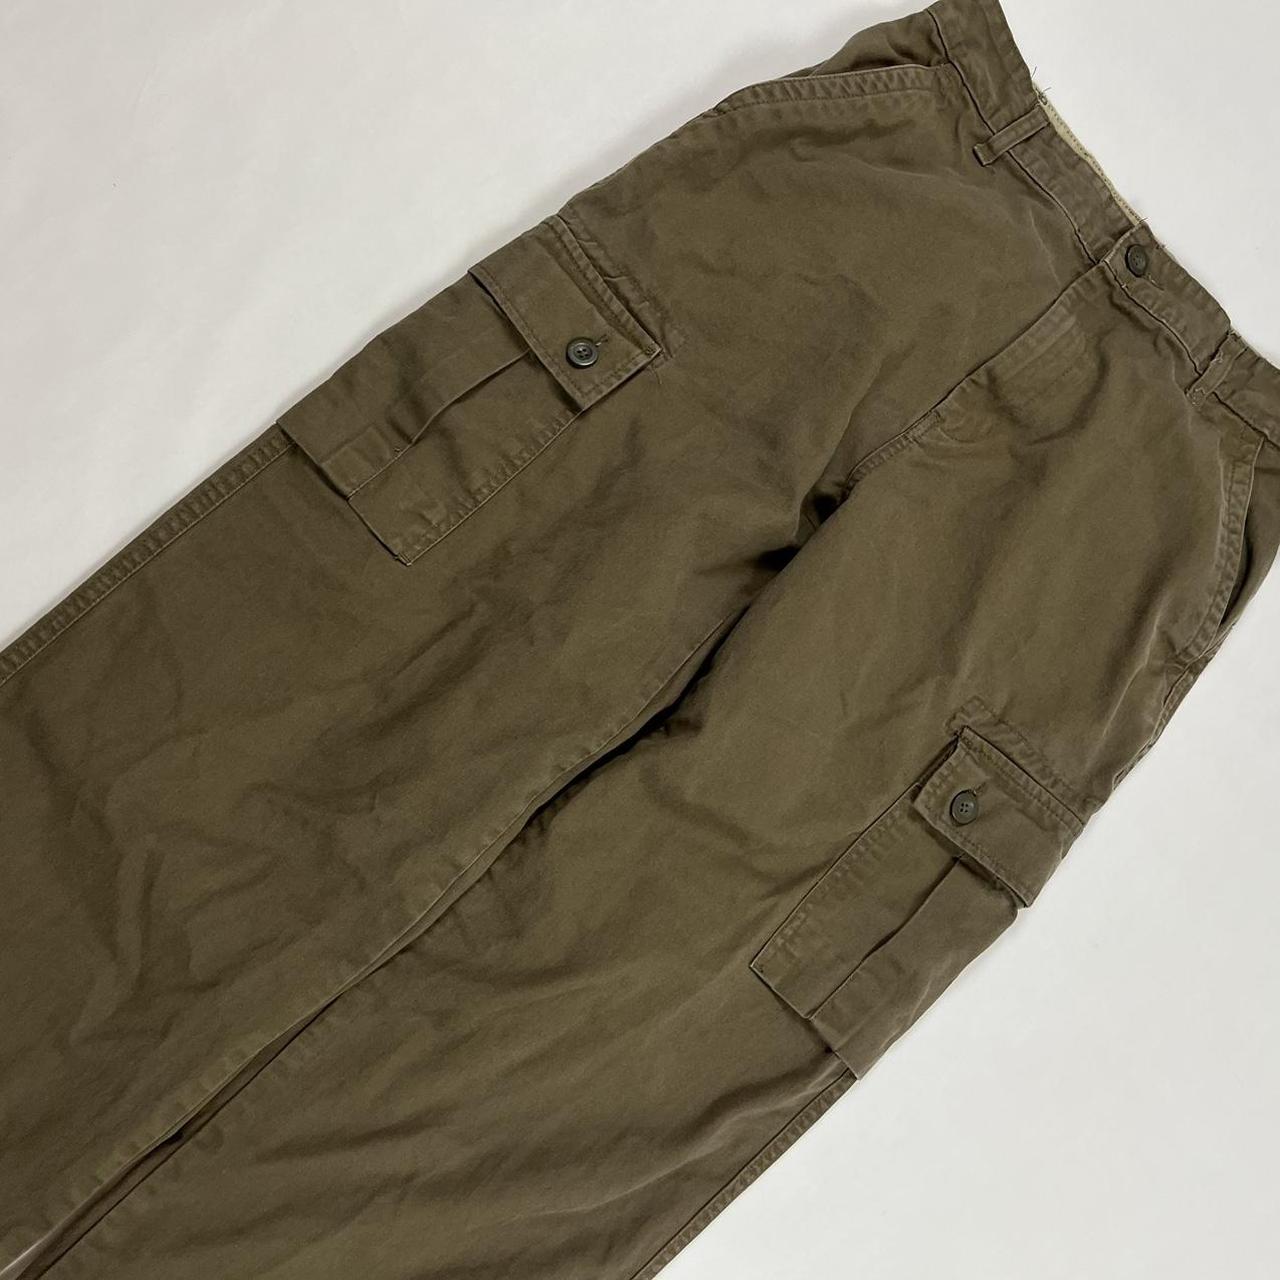 Arizona Jeans Cargo Pant Mens Fashion Bottoms Jeans on Carousell